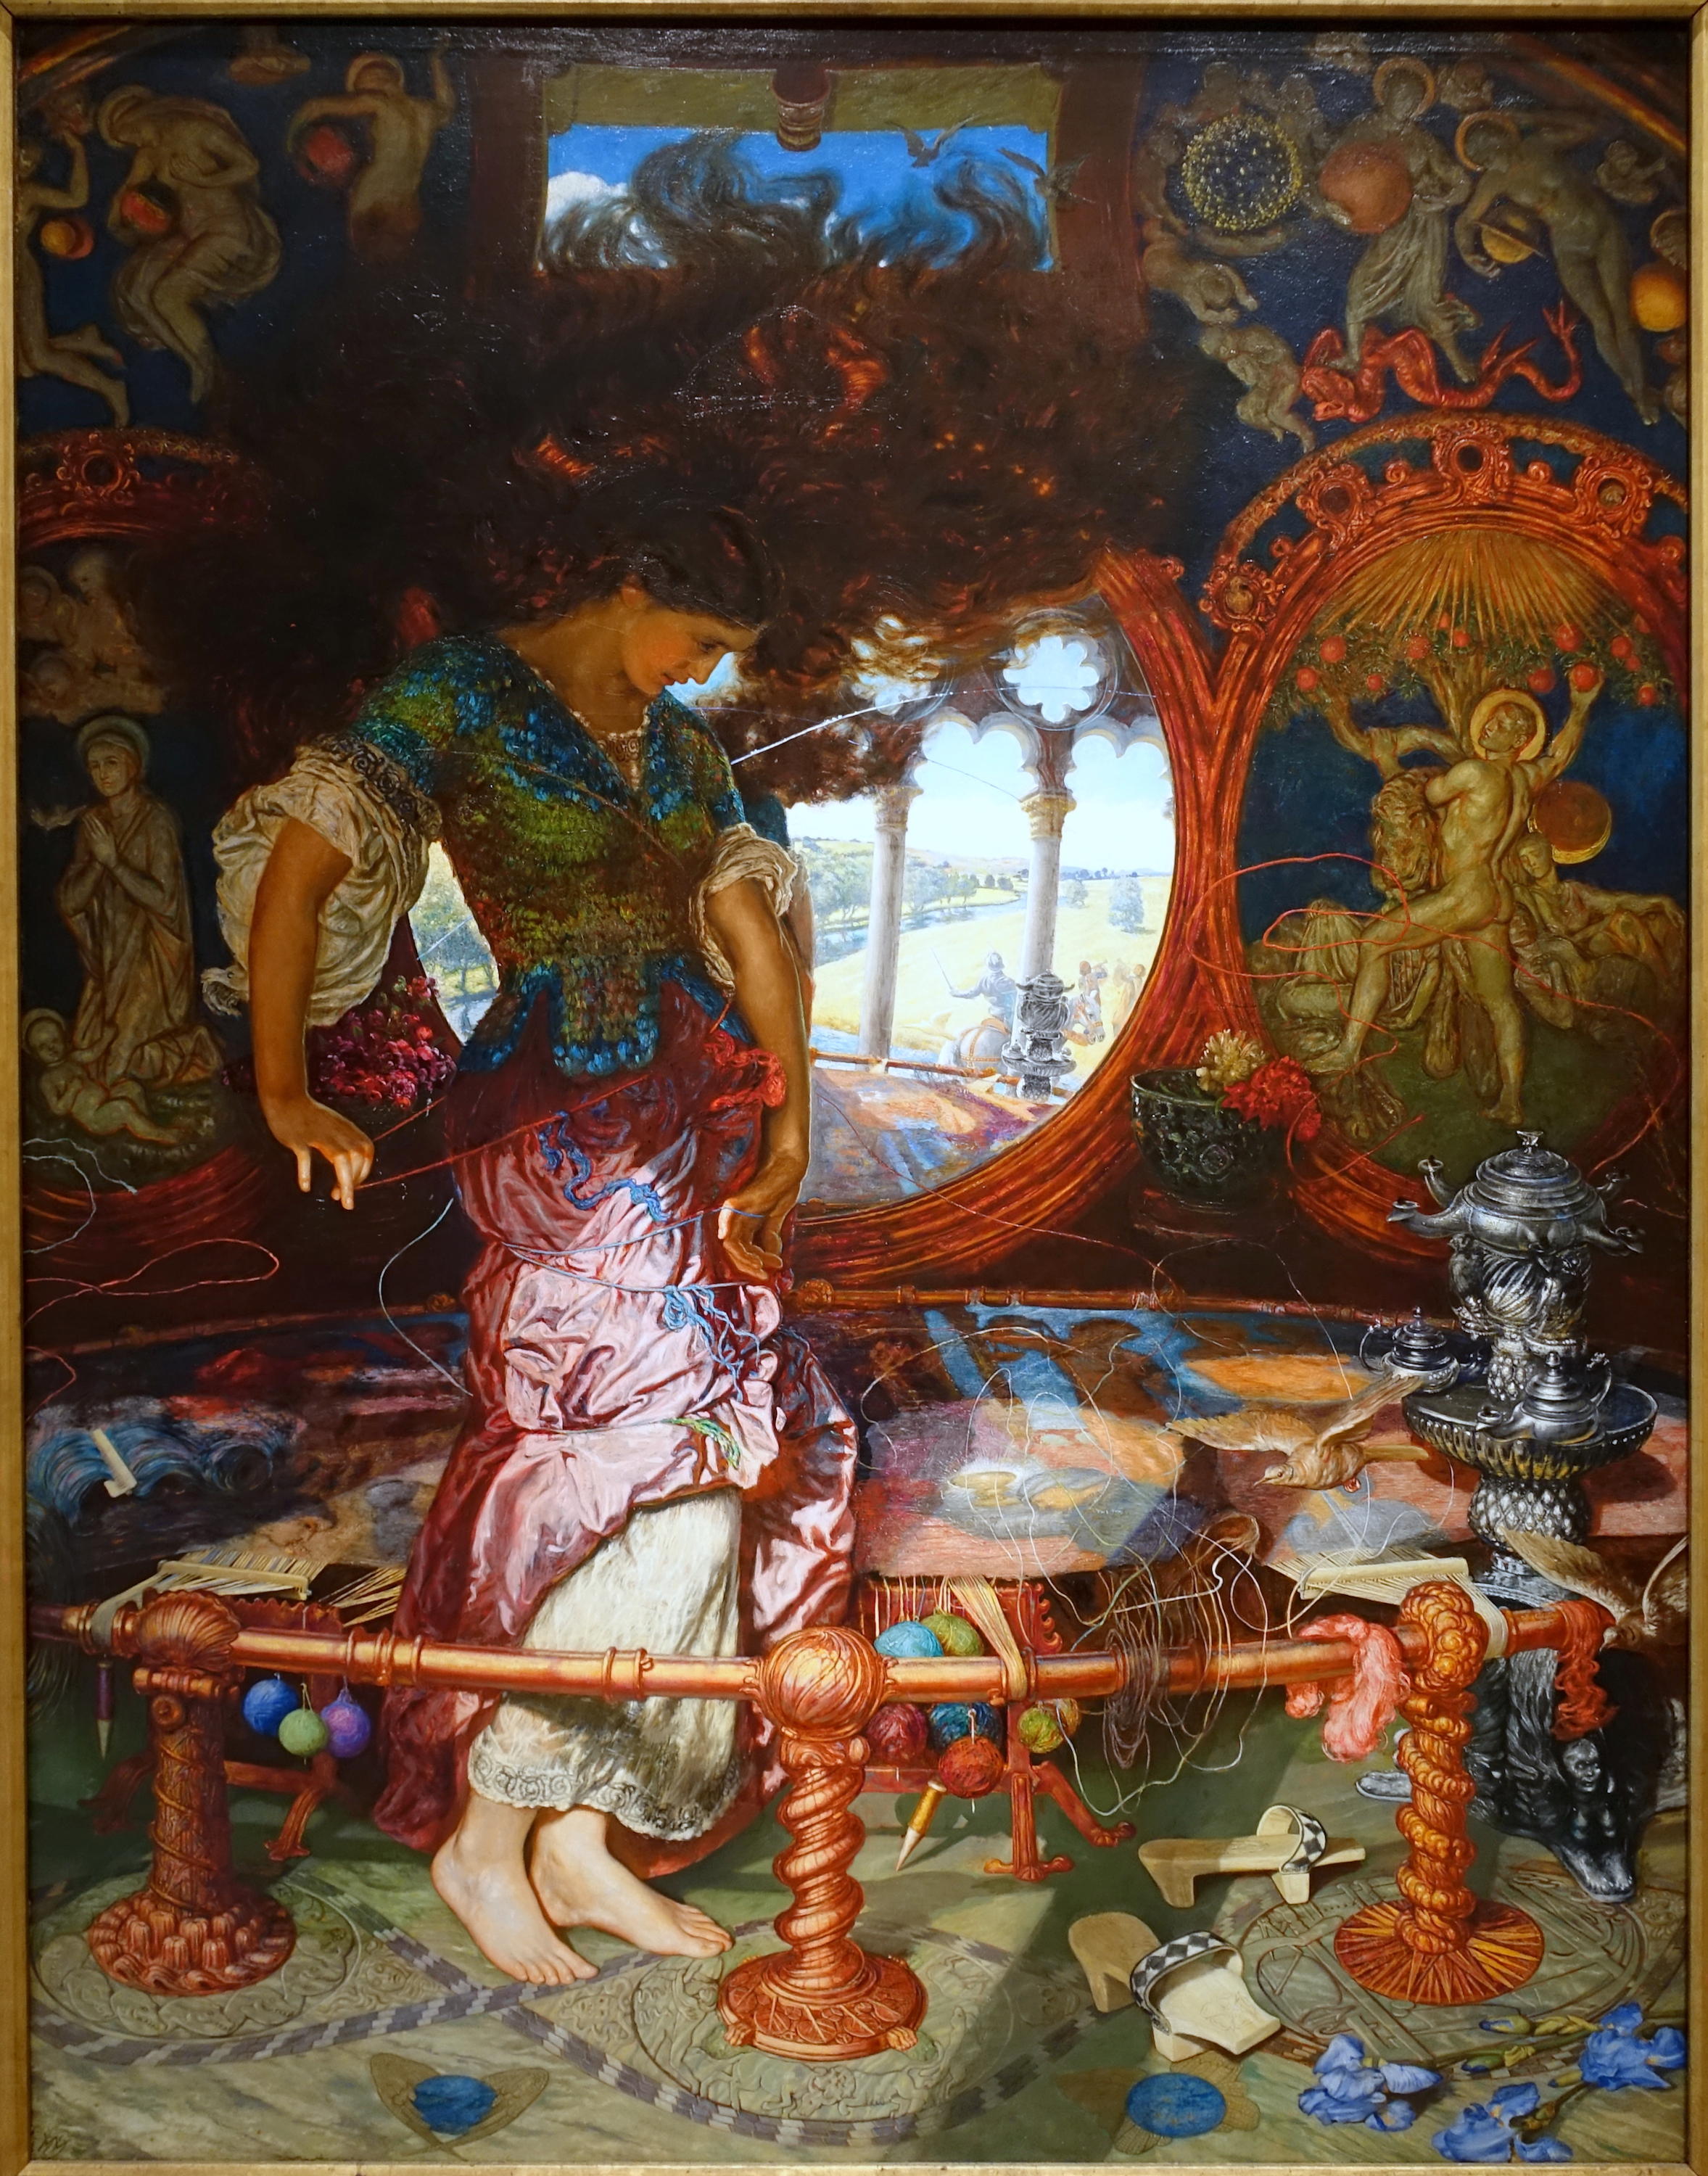 The Lady of Shalott by William Holman Hunt - c. 1890-1905 Wadsworth Atheneum Museum of Art